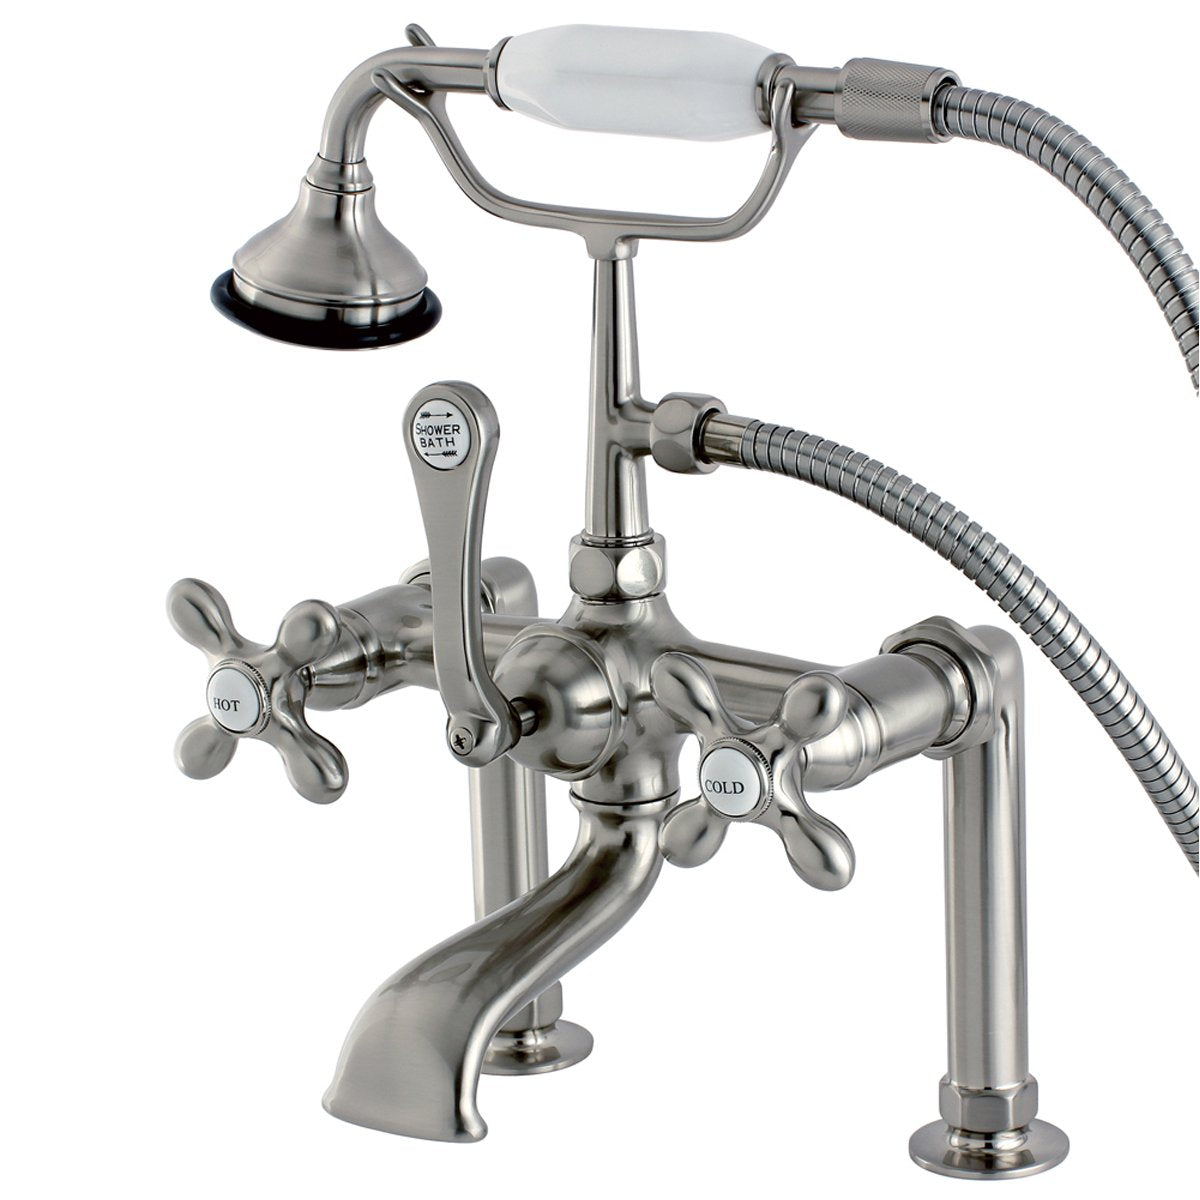 Kingston Brass Aqua Eden Vintage Deck Mount Clawfoot Tub Faucet with Metal Cross Handle-Tub Faucets-Free Shipping-Directsinks.